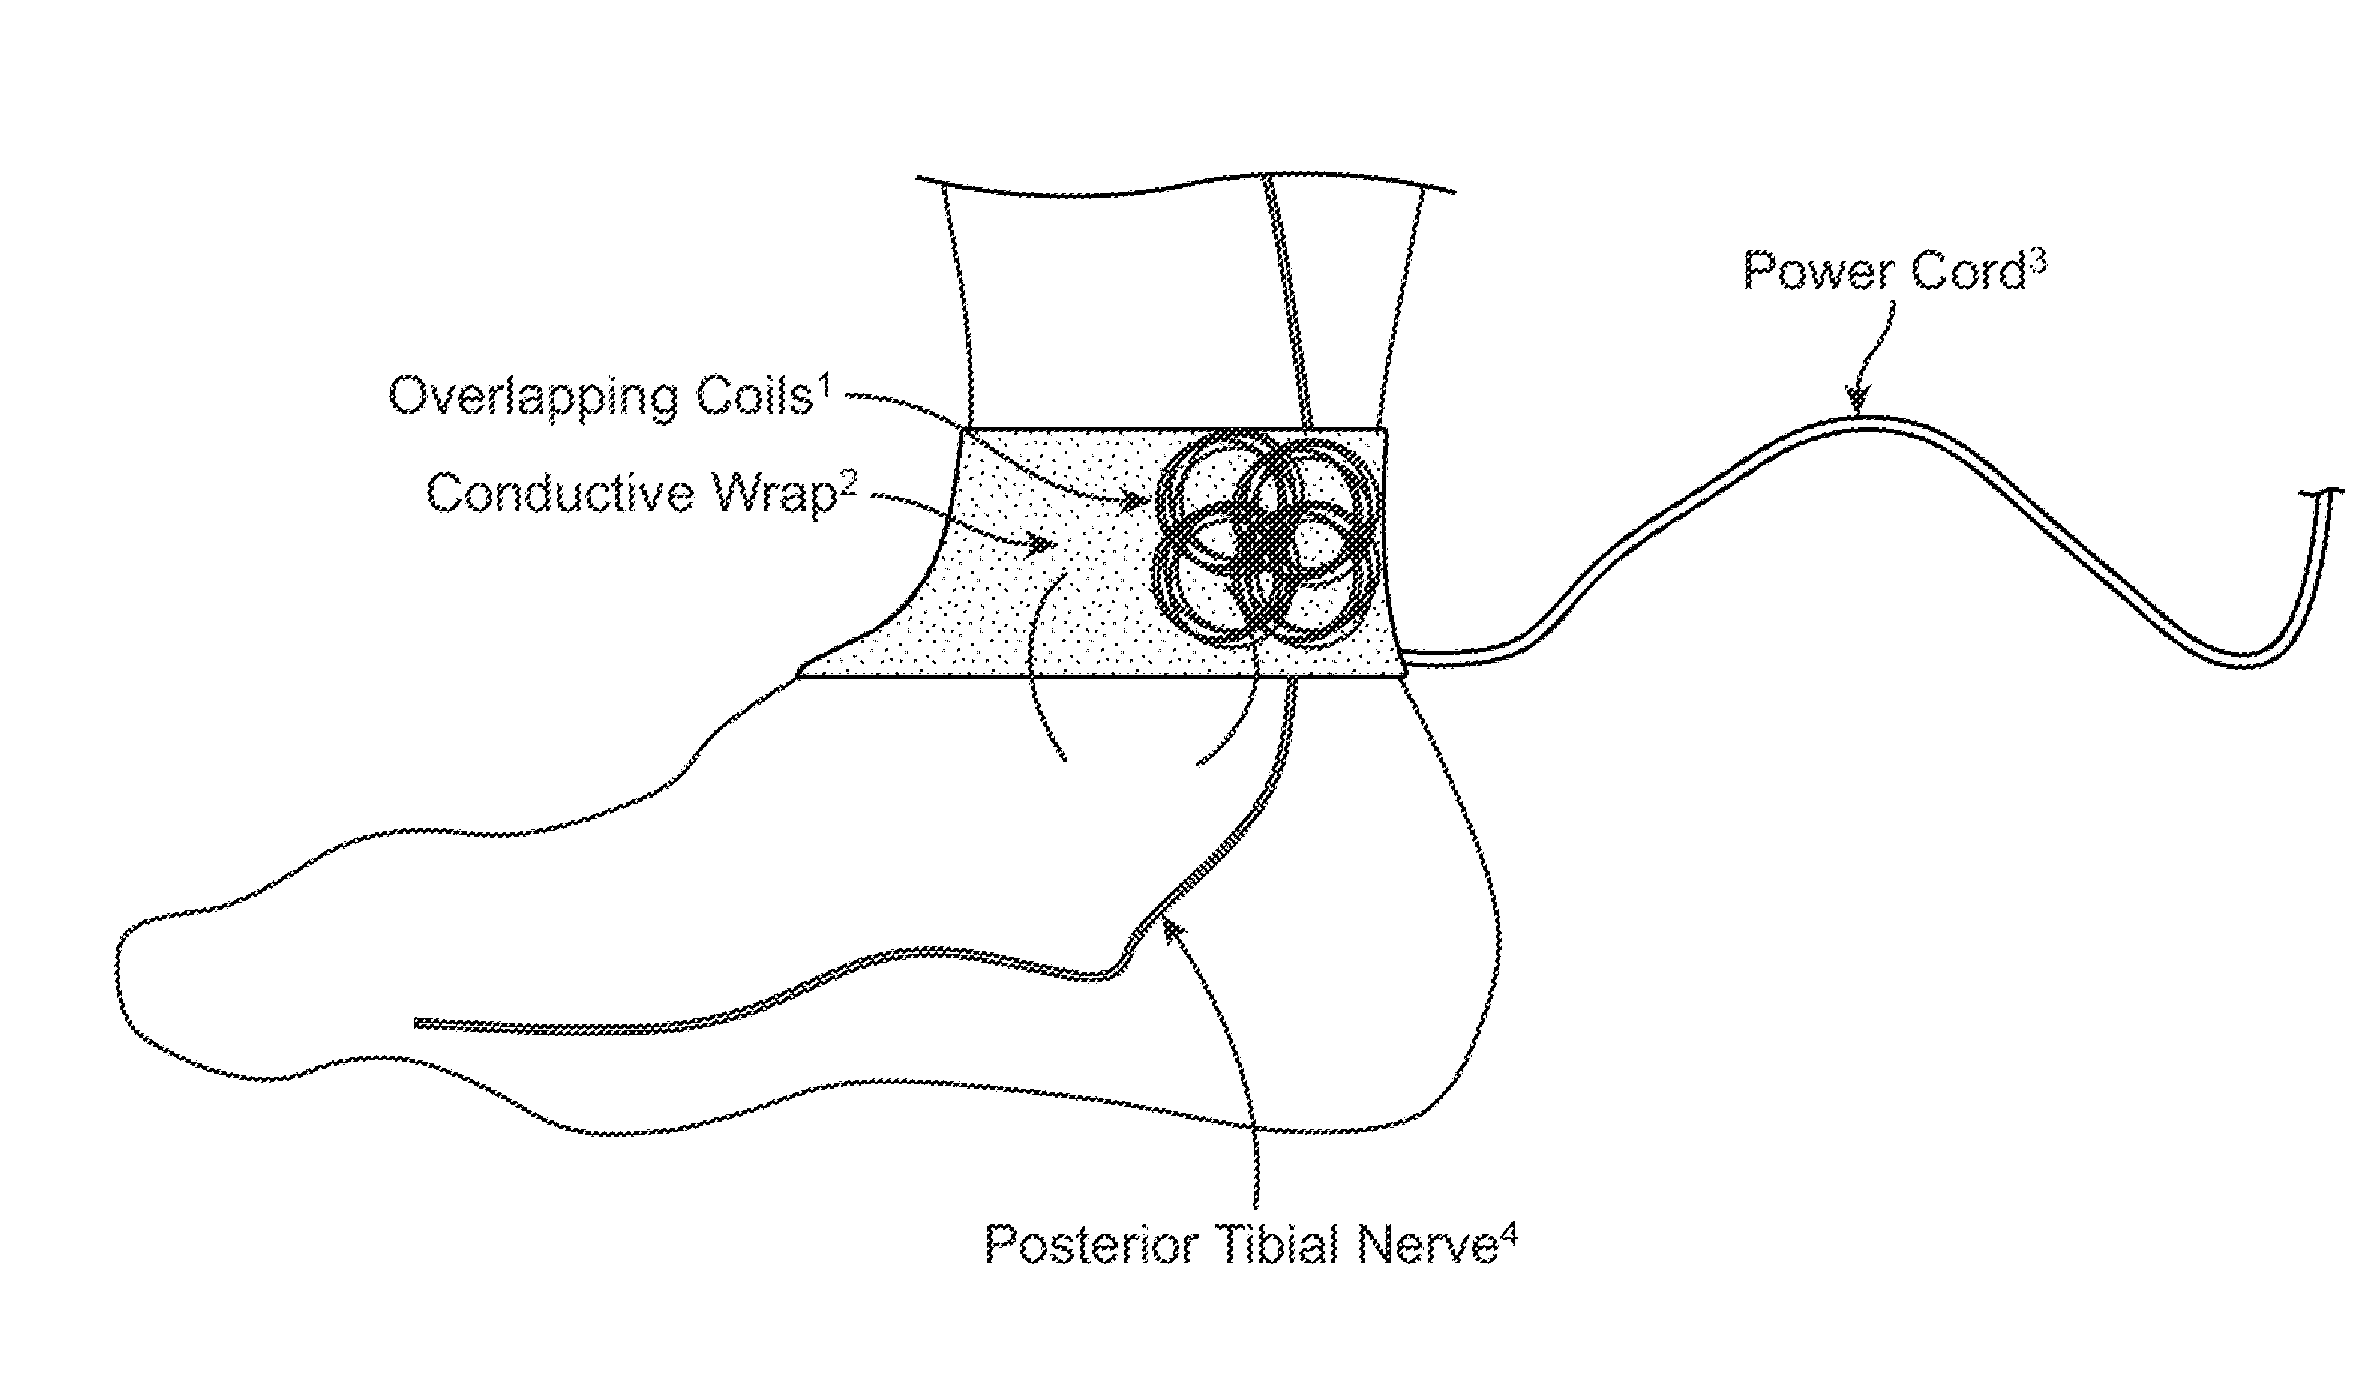 Method and apparatus for low frequency induction therapy for the treatment of urinary incontinence and overactive bladder